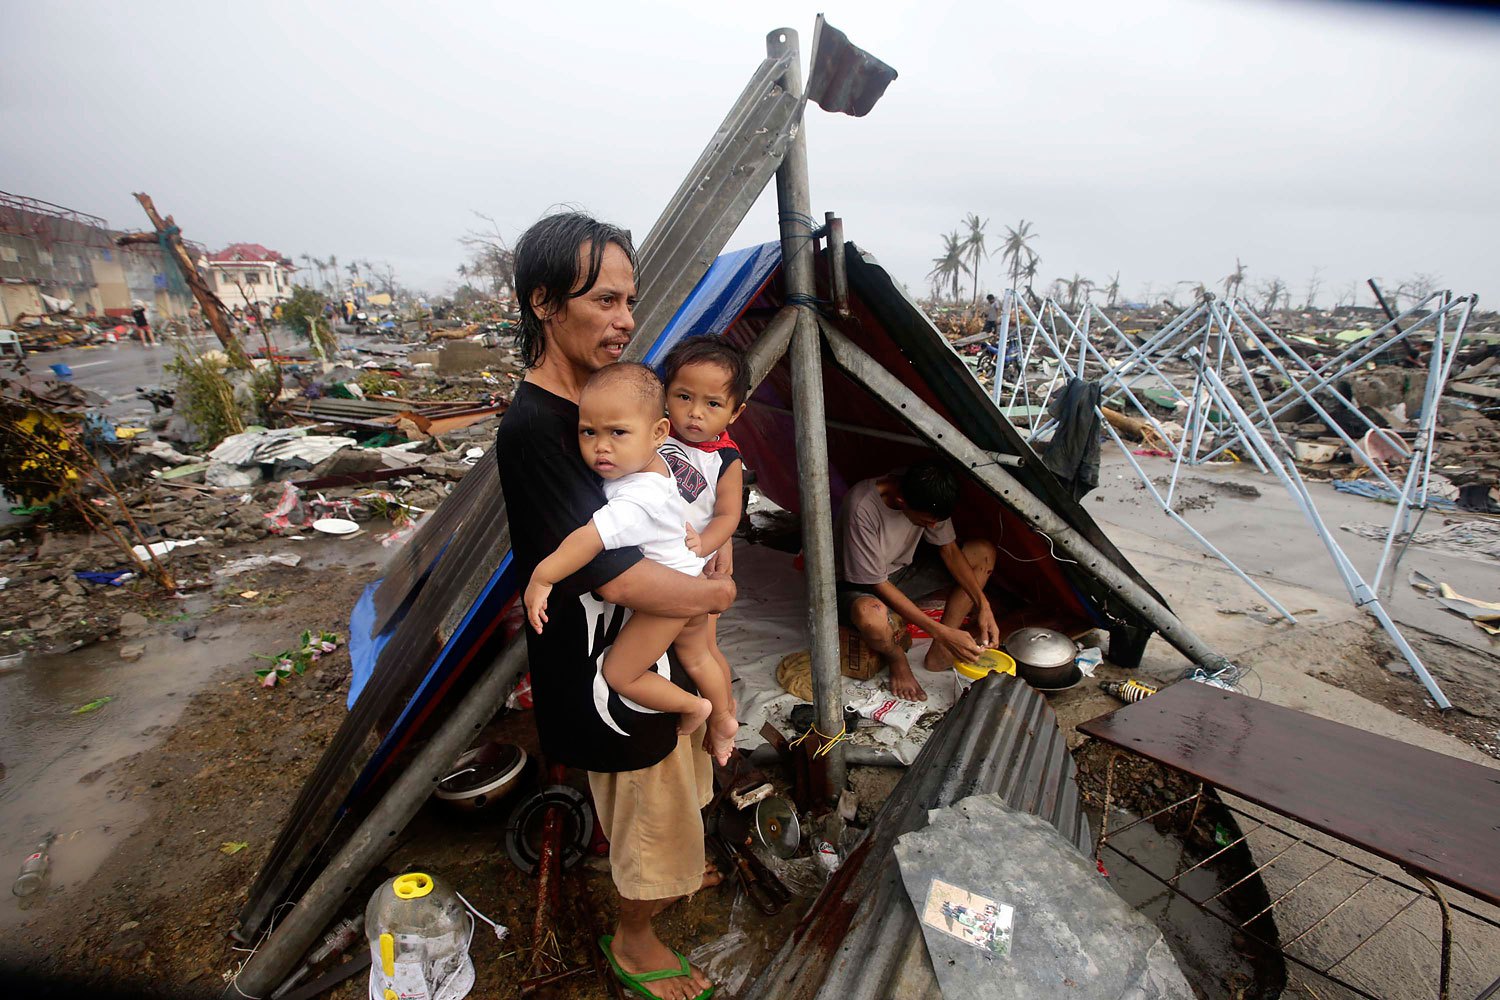 A Filipino father and his children wait for food relief outside their makeshift tent in the supertyphoon-devastated city of Tacloban, in the Philippines' Leyte province, on Nov. 10, 2013